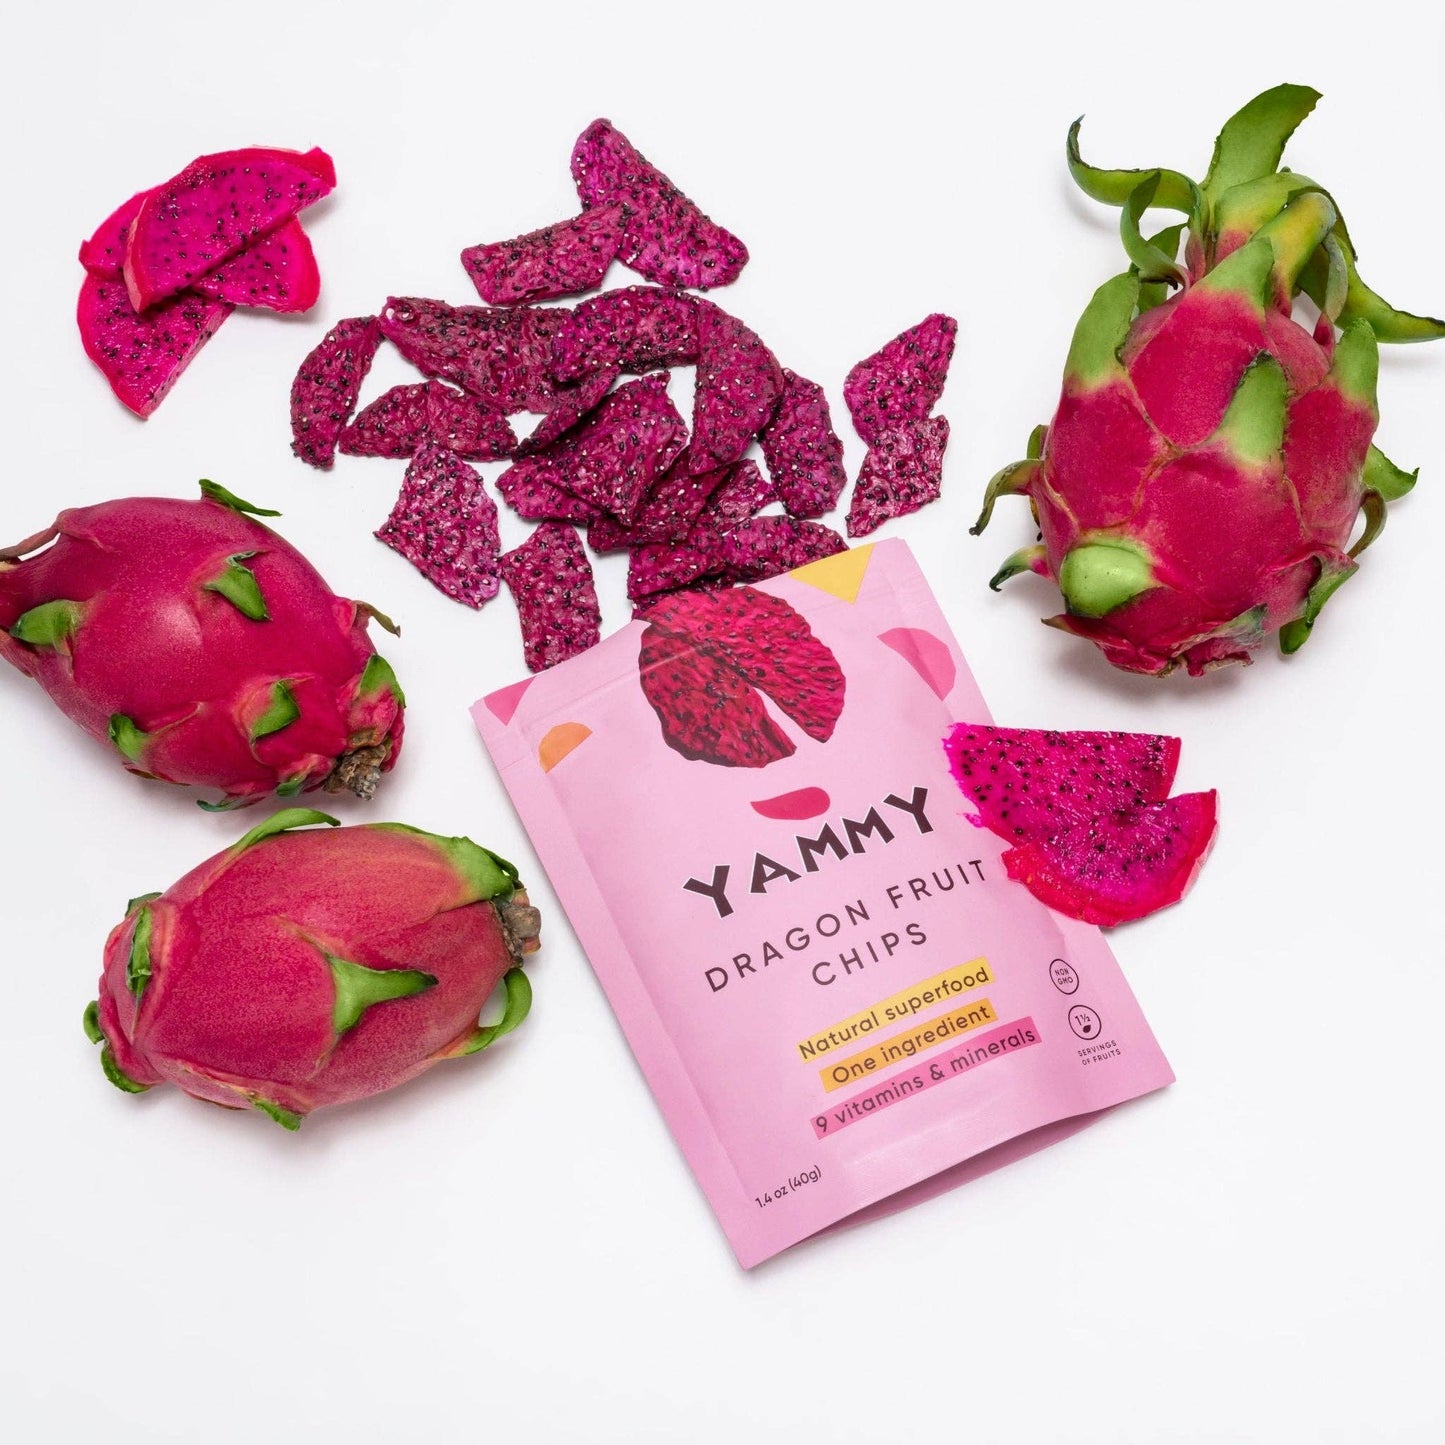 Yammy Dried Dragon Fruit Chips